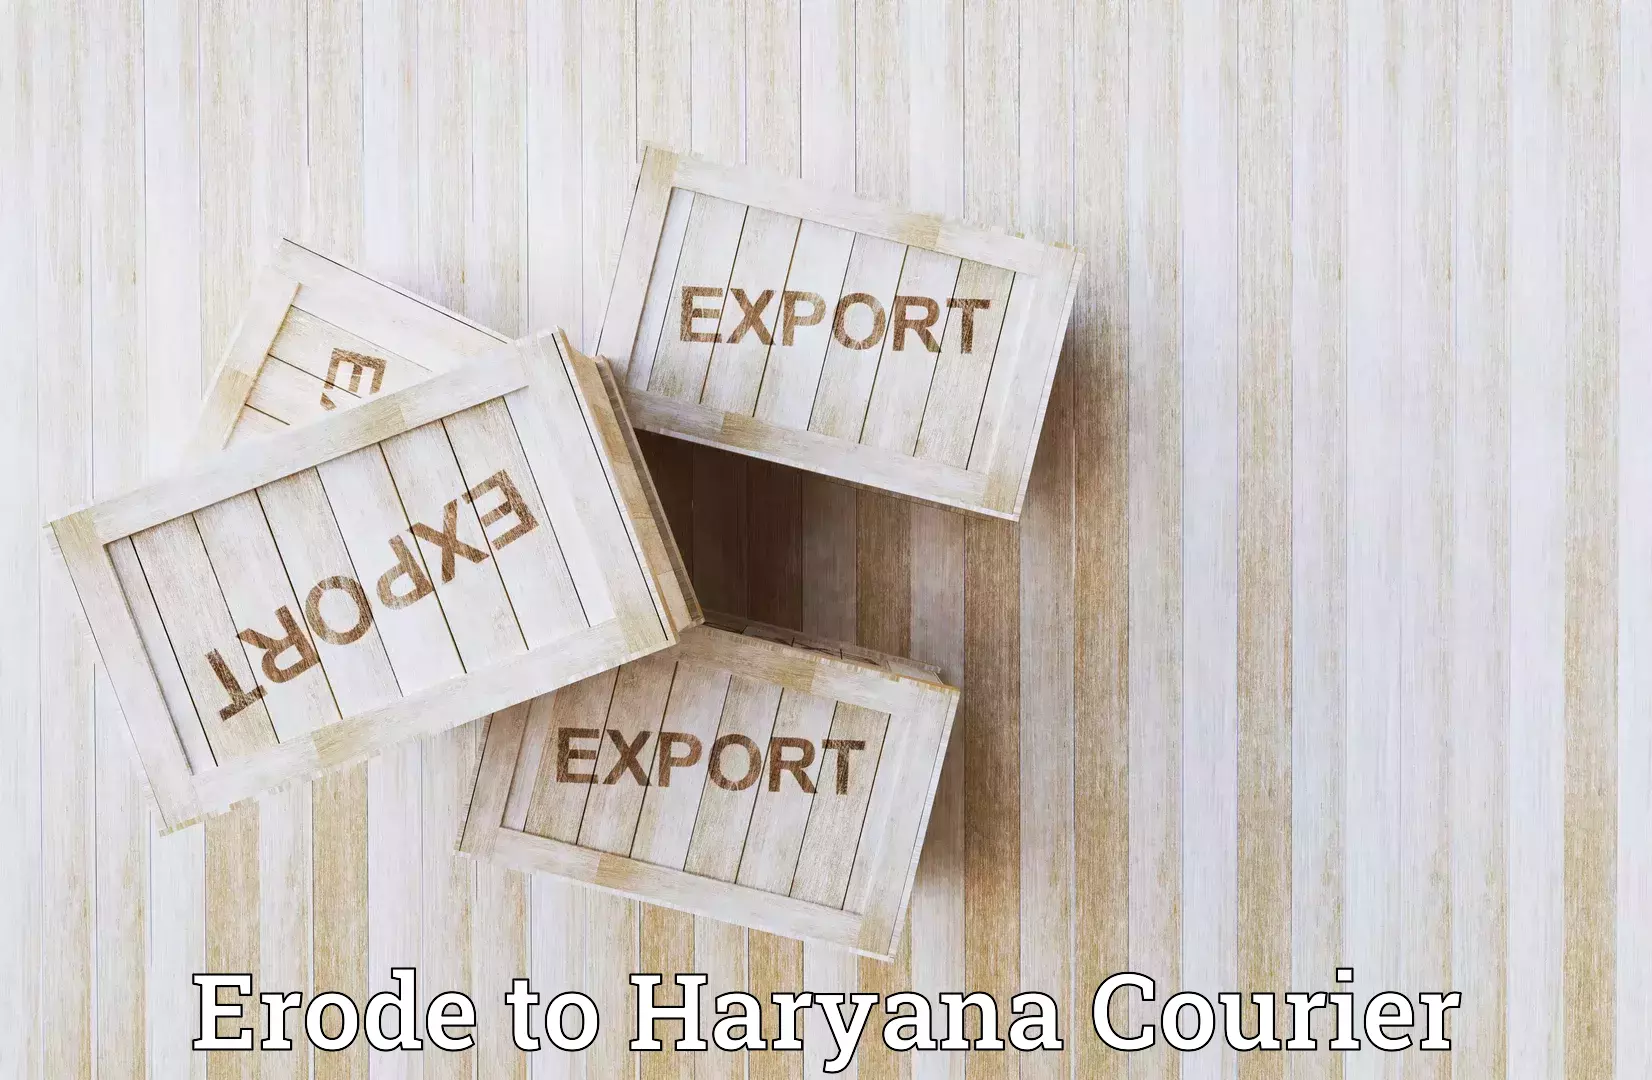 Sustainable shipping practices Erode to Haryana